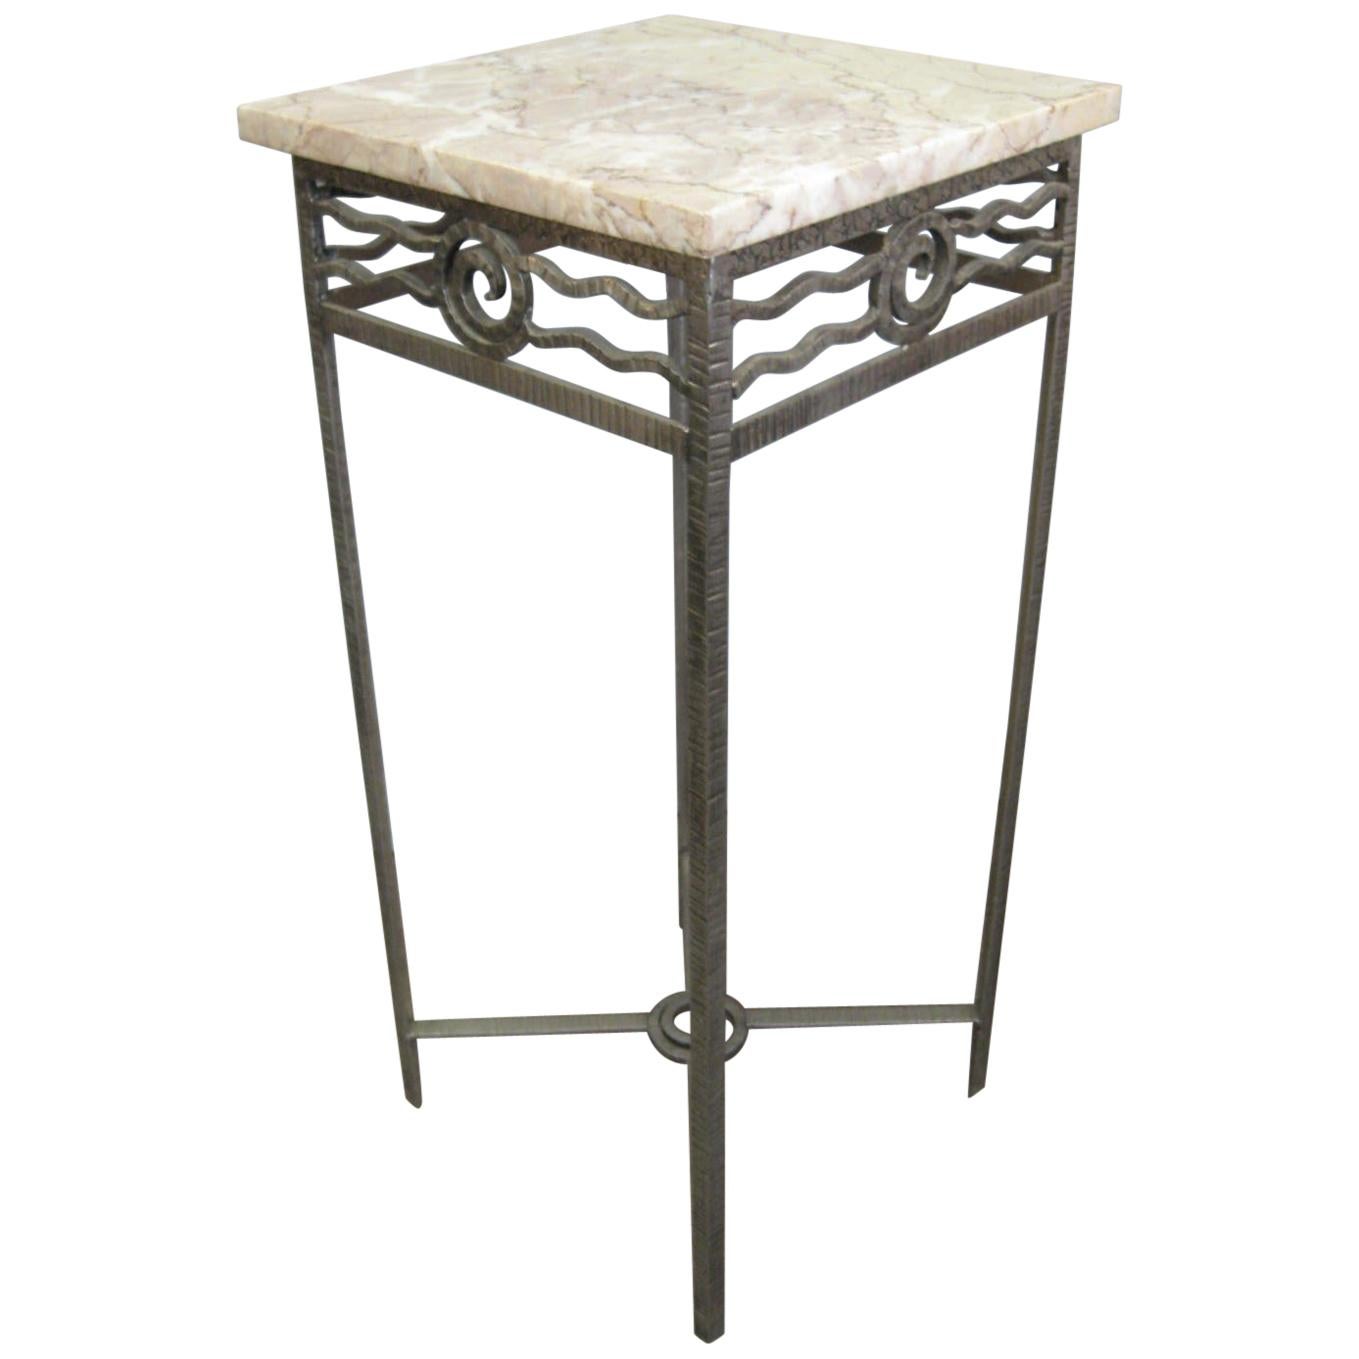 French Art Deco Hand Hammered Iron Small Table / Pedestal, Charles Piguet